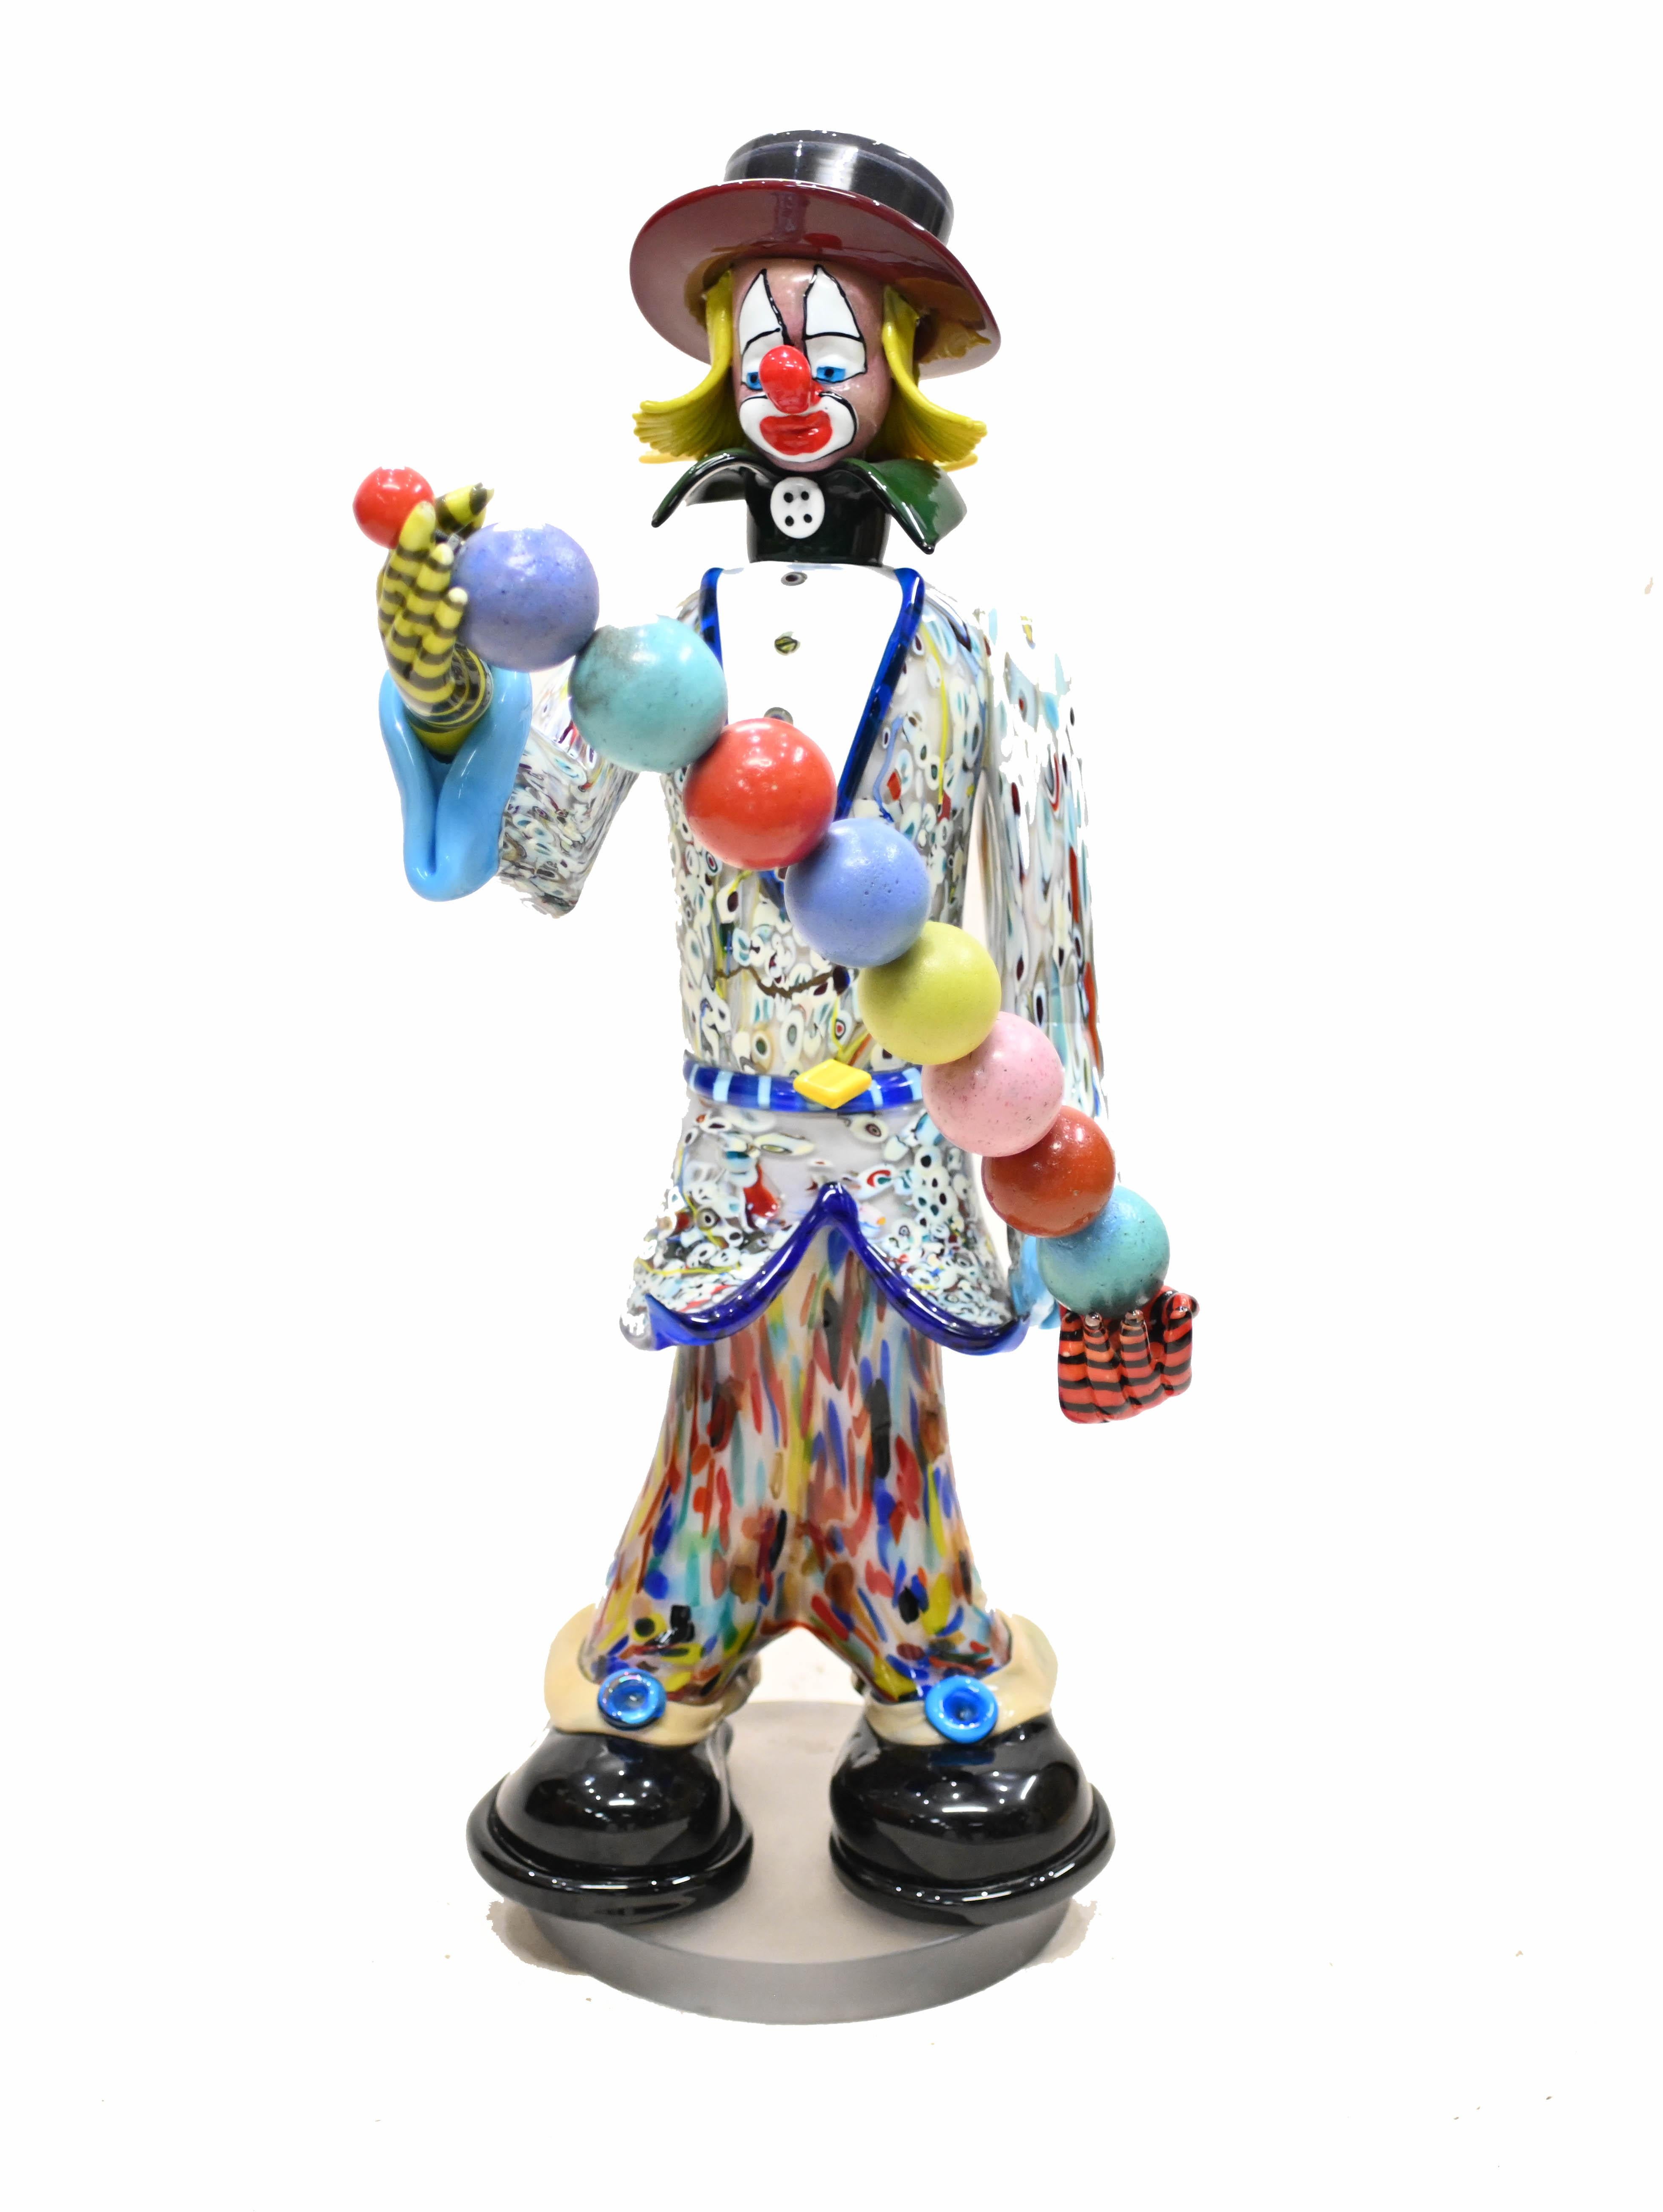 Clown Statue - 10 For Sale on 1stDibs  clown statues for sale, clown statue  story, vintage story statue